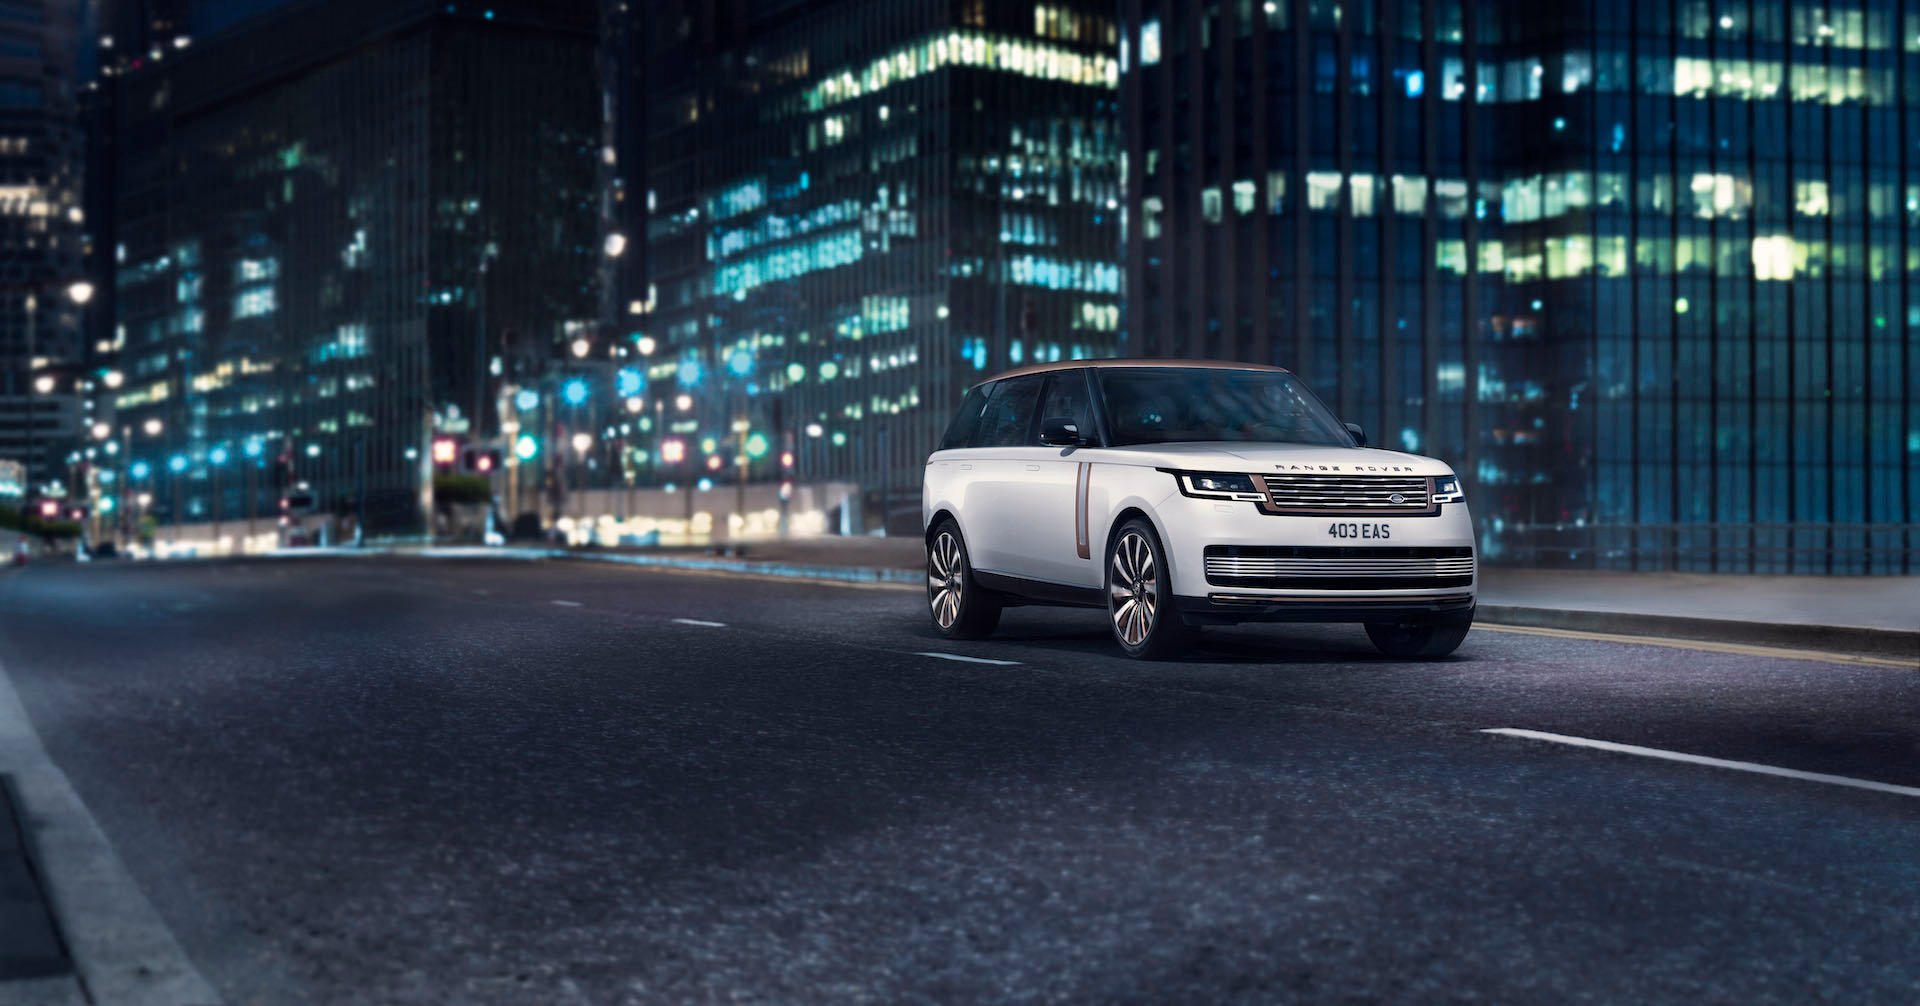 Buy your Land Rover online with Rockar Land Rover Canary Wharf